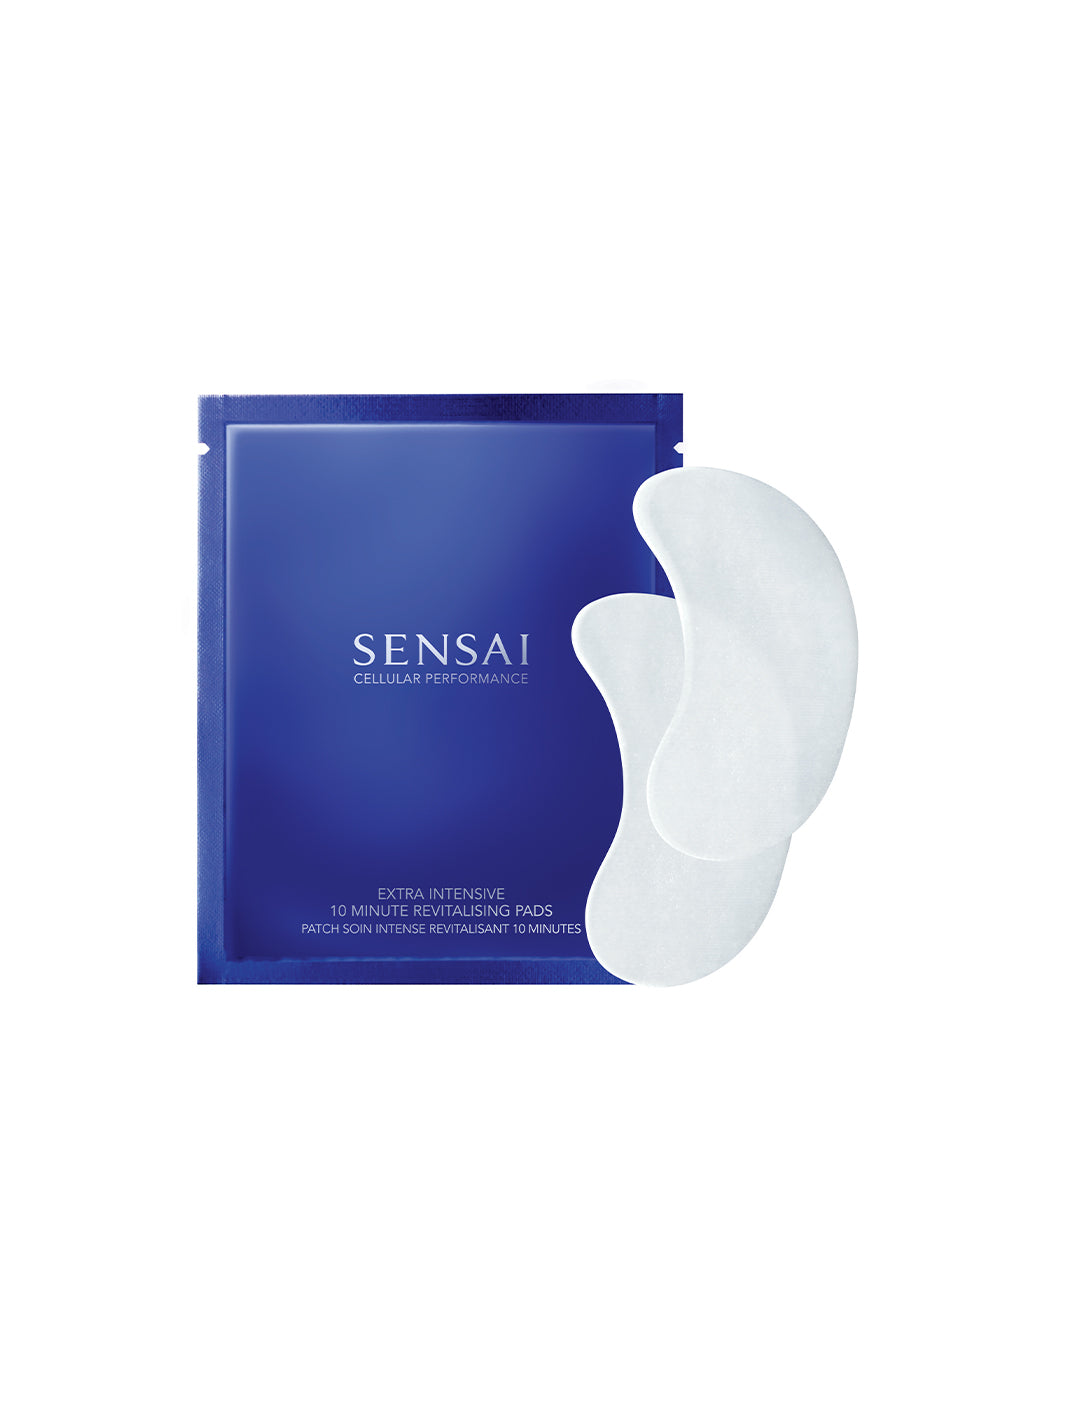 Cellular Performance Extra Intensive 10 Minute Revitalising Pads 10 pz